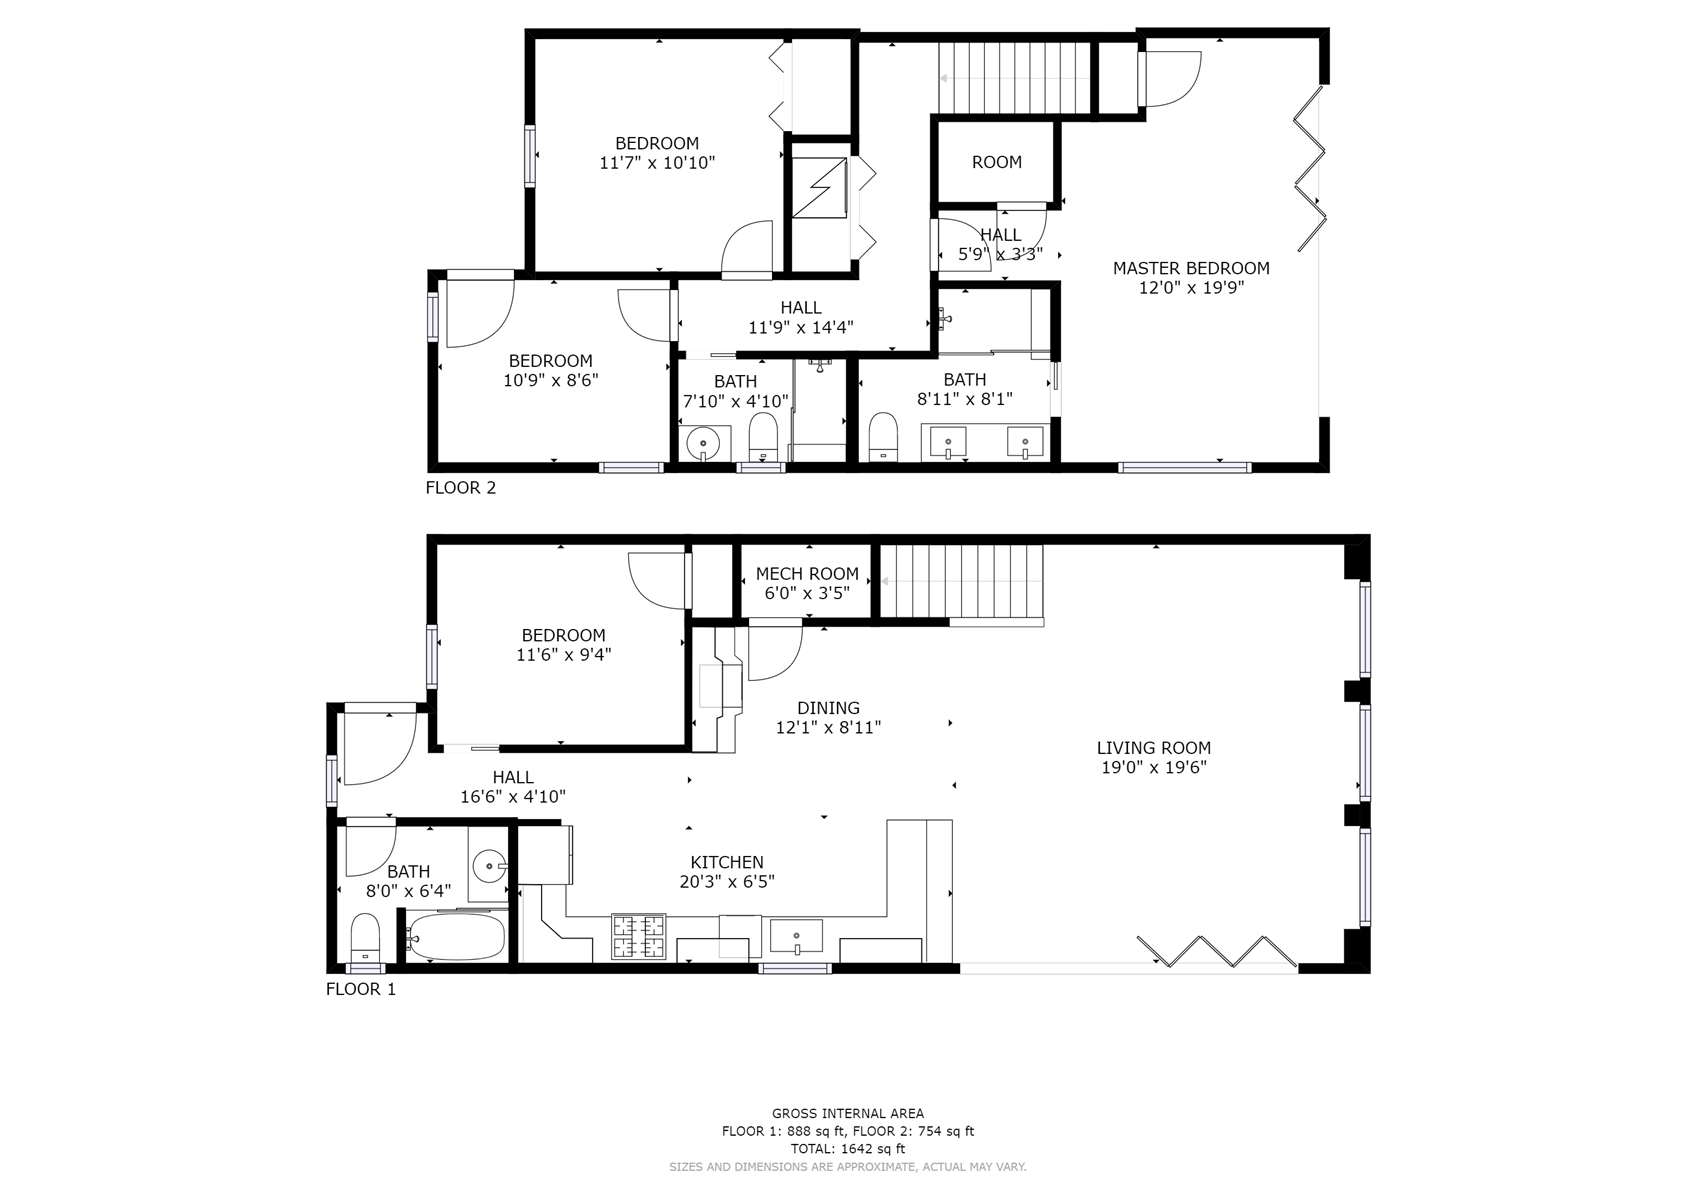 Floor Plan for BOARD141 - Custom Boardwalk Front Home! Smart home features, amazing views & location